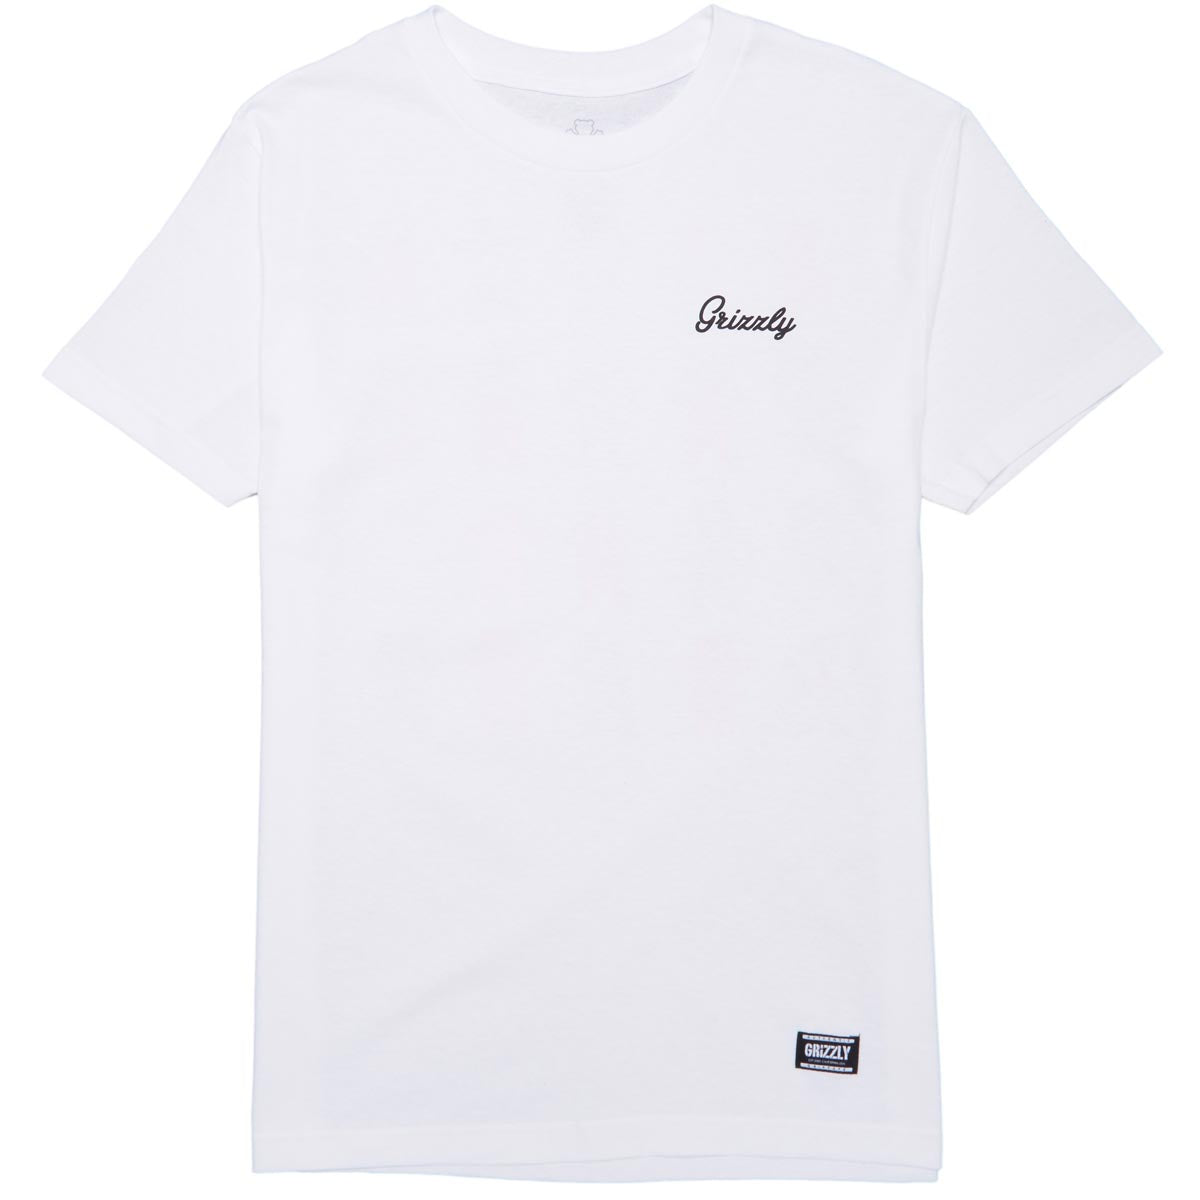 Grizzly Rolling Deep T-Shirt - White image 2